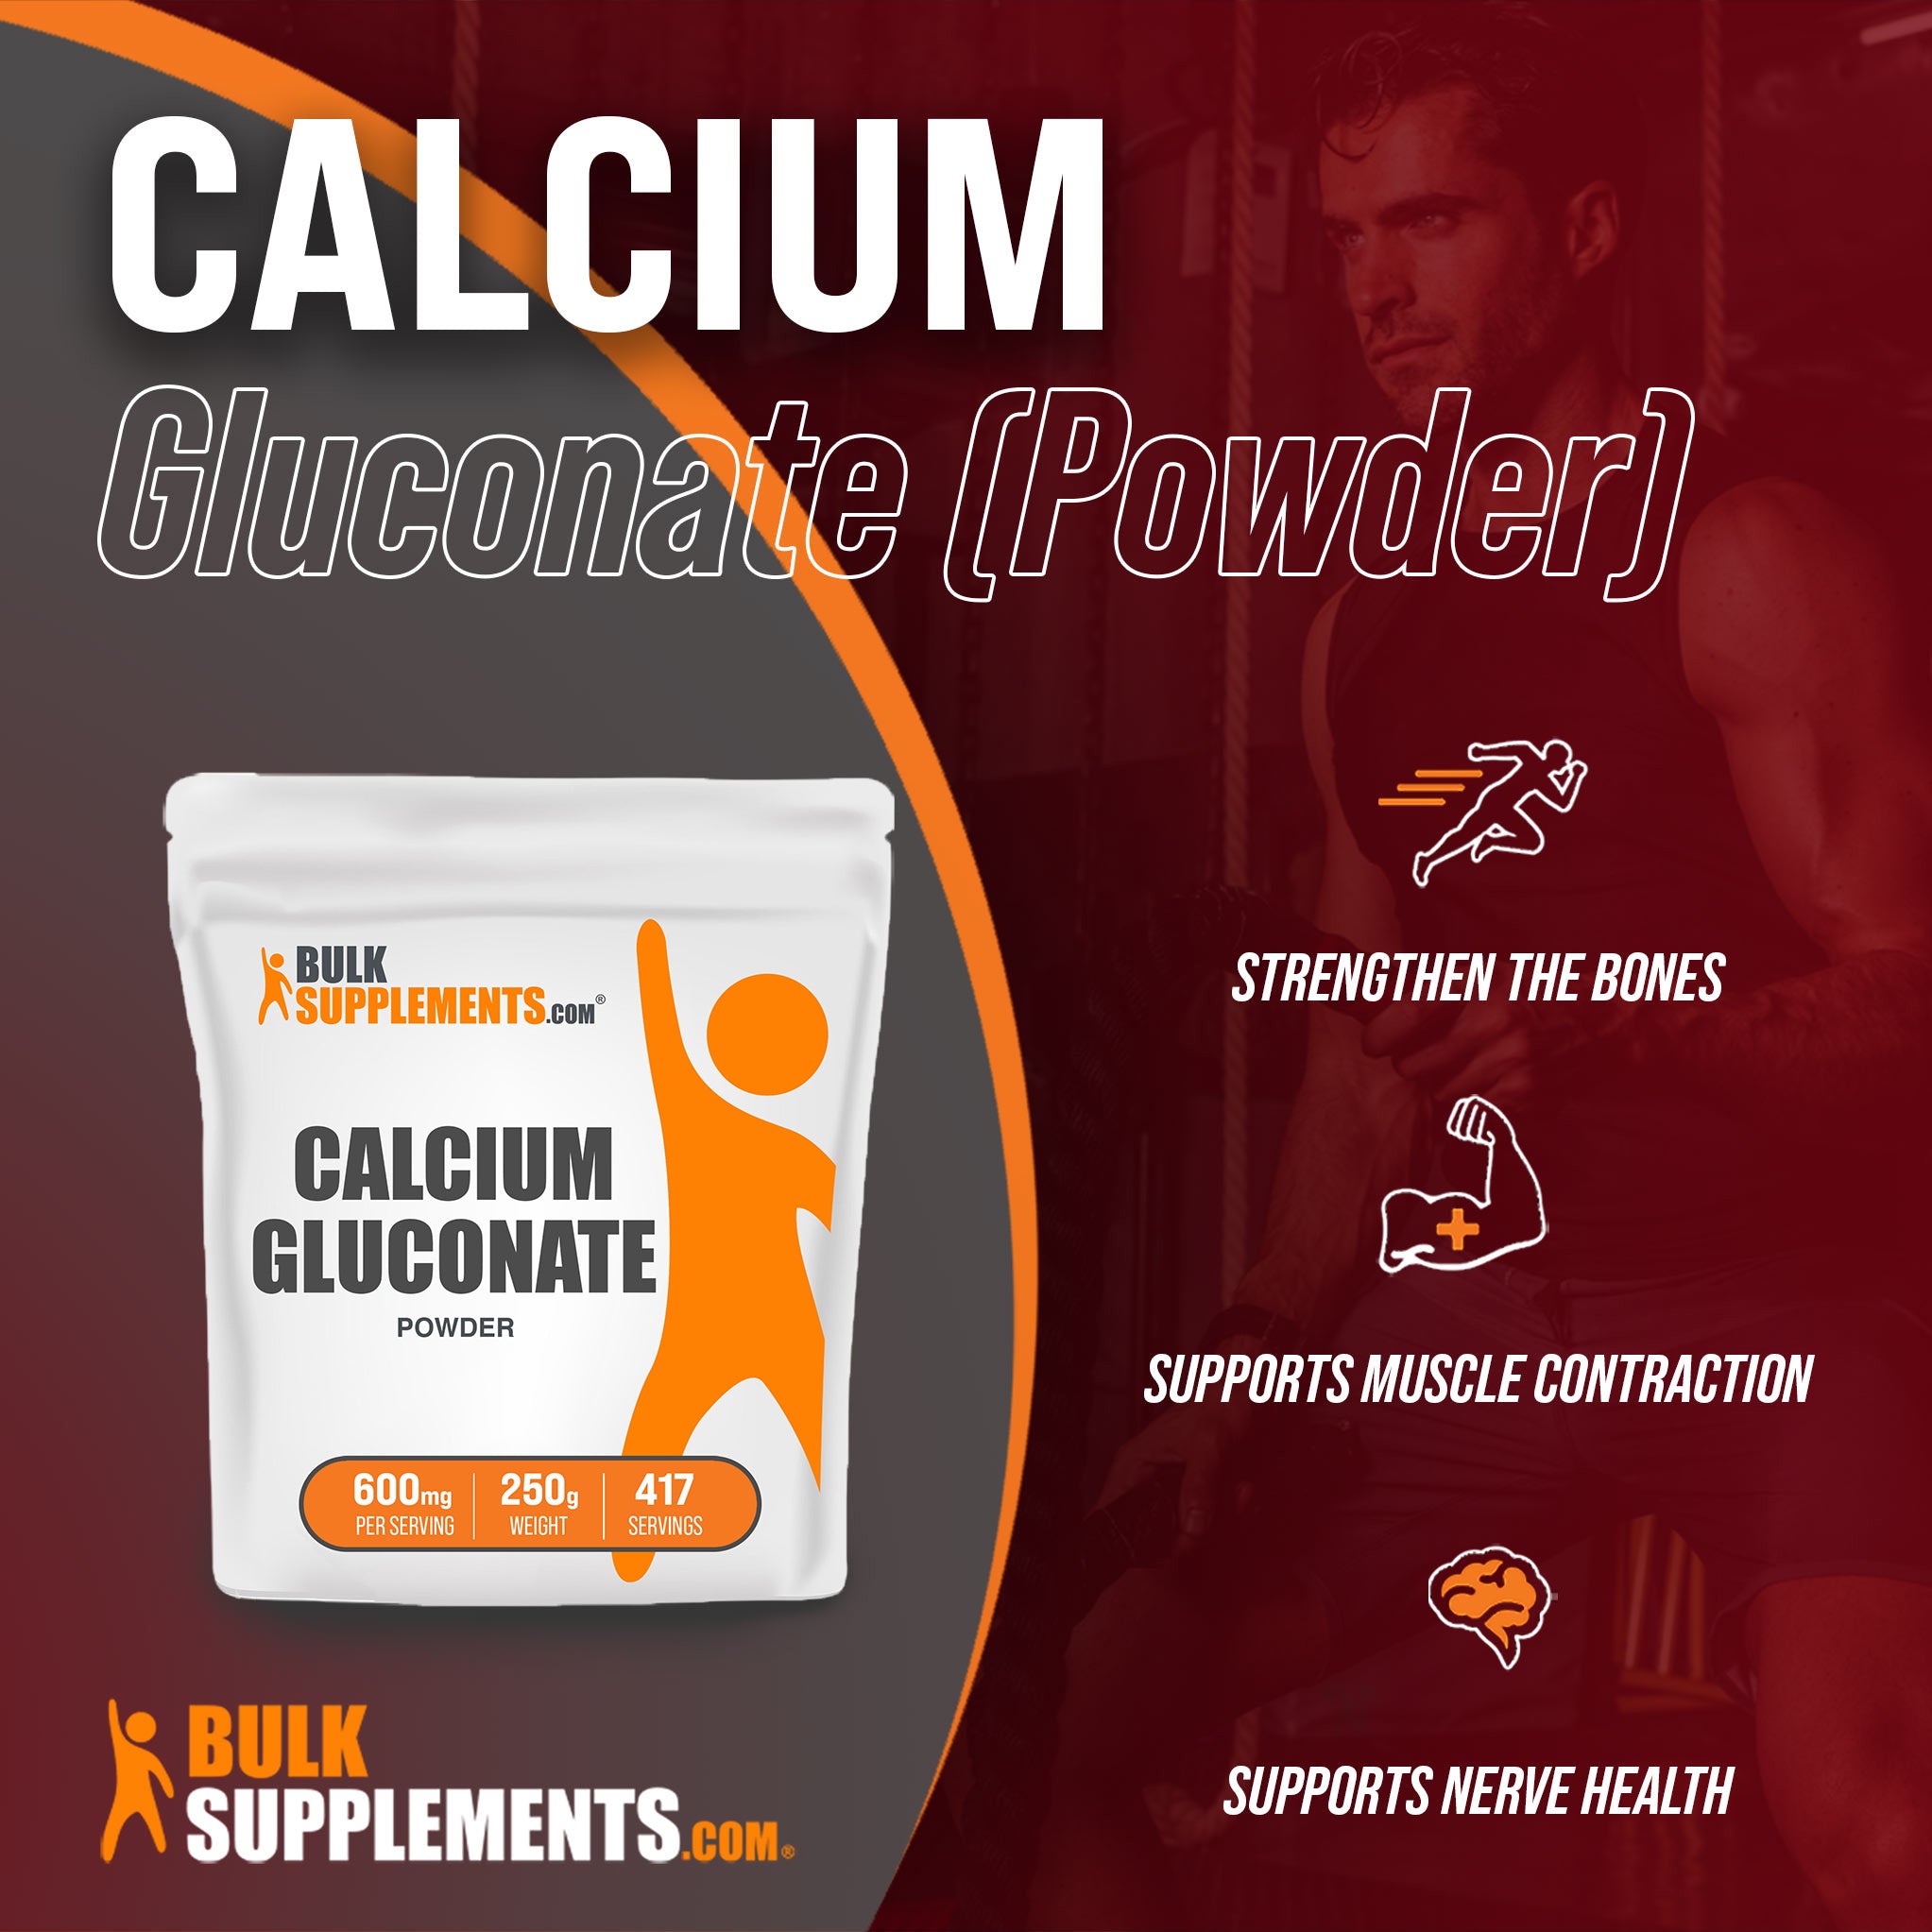 Benefits of Calcium Gluconate Powder; strengthen the bones, supports muscle contraction, supports nerve health